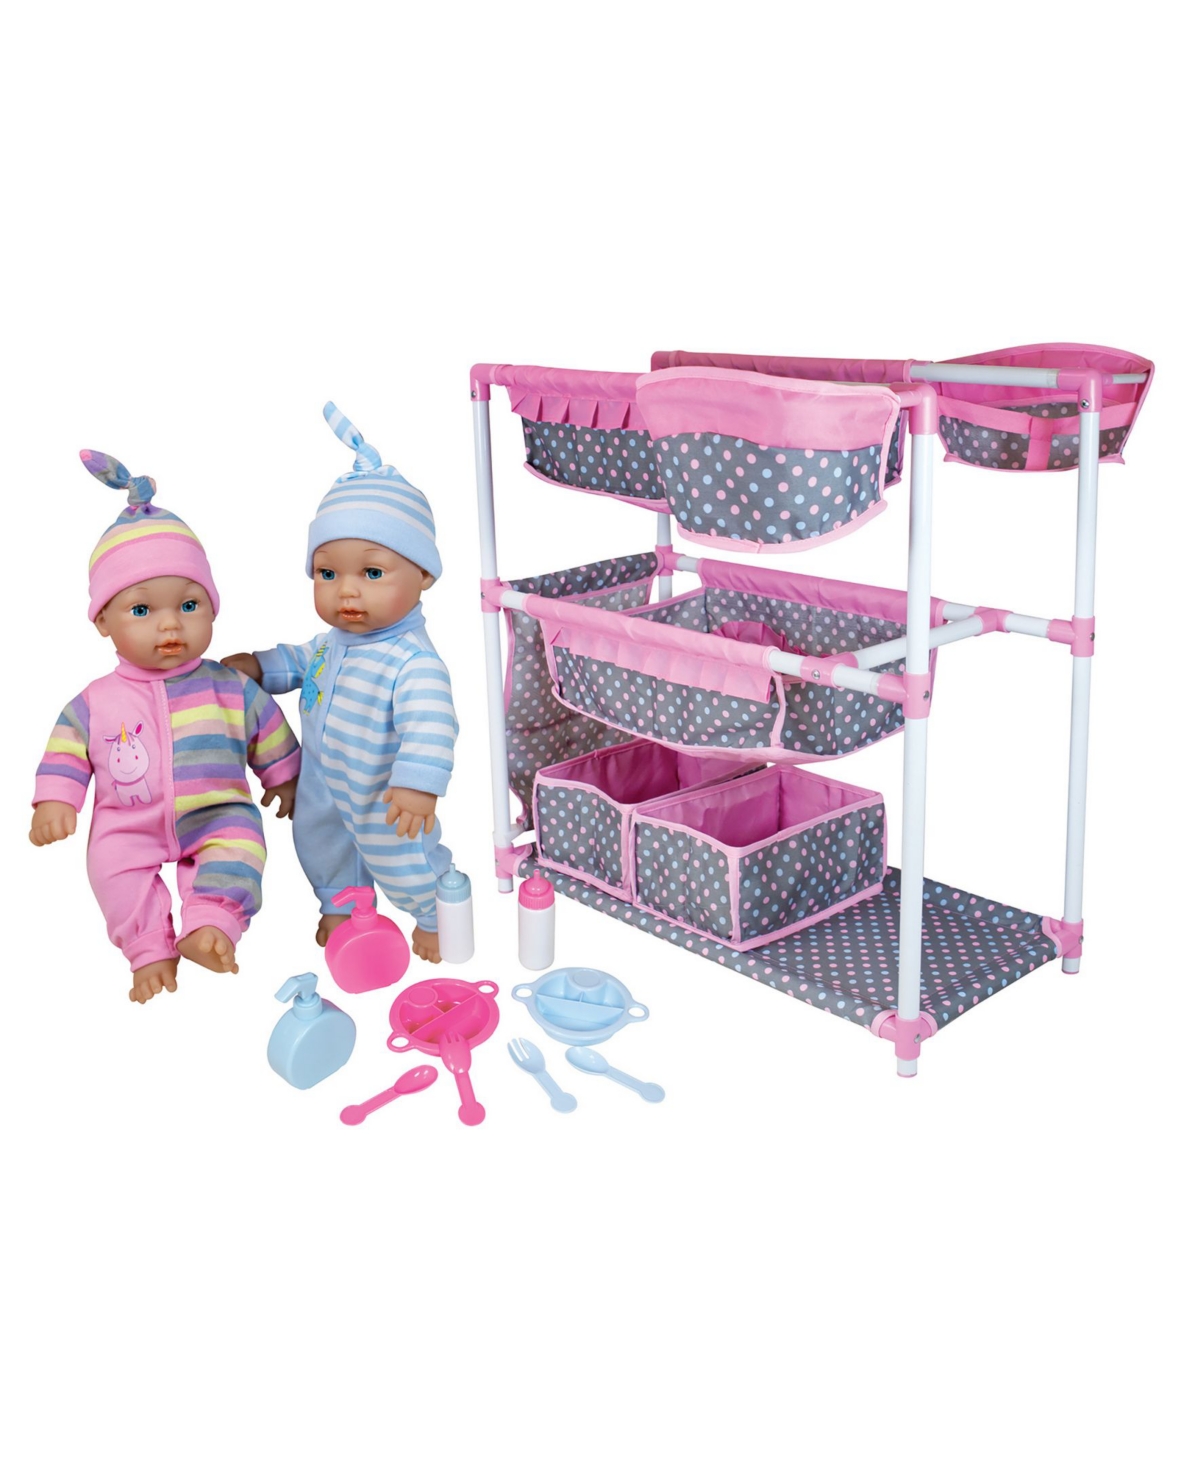 Redbox Lissi Dolls Baby Care Center For Twins With 2 Toy Baby Dolls And Feeding Accessories In Multi